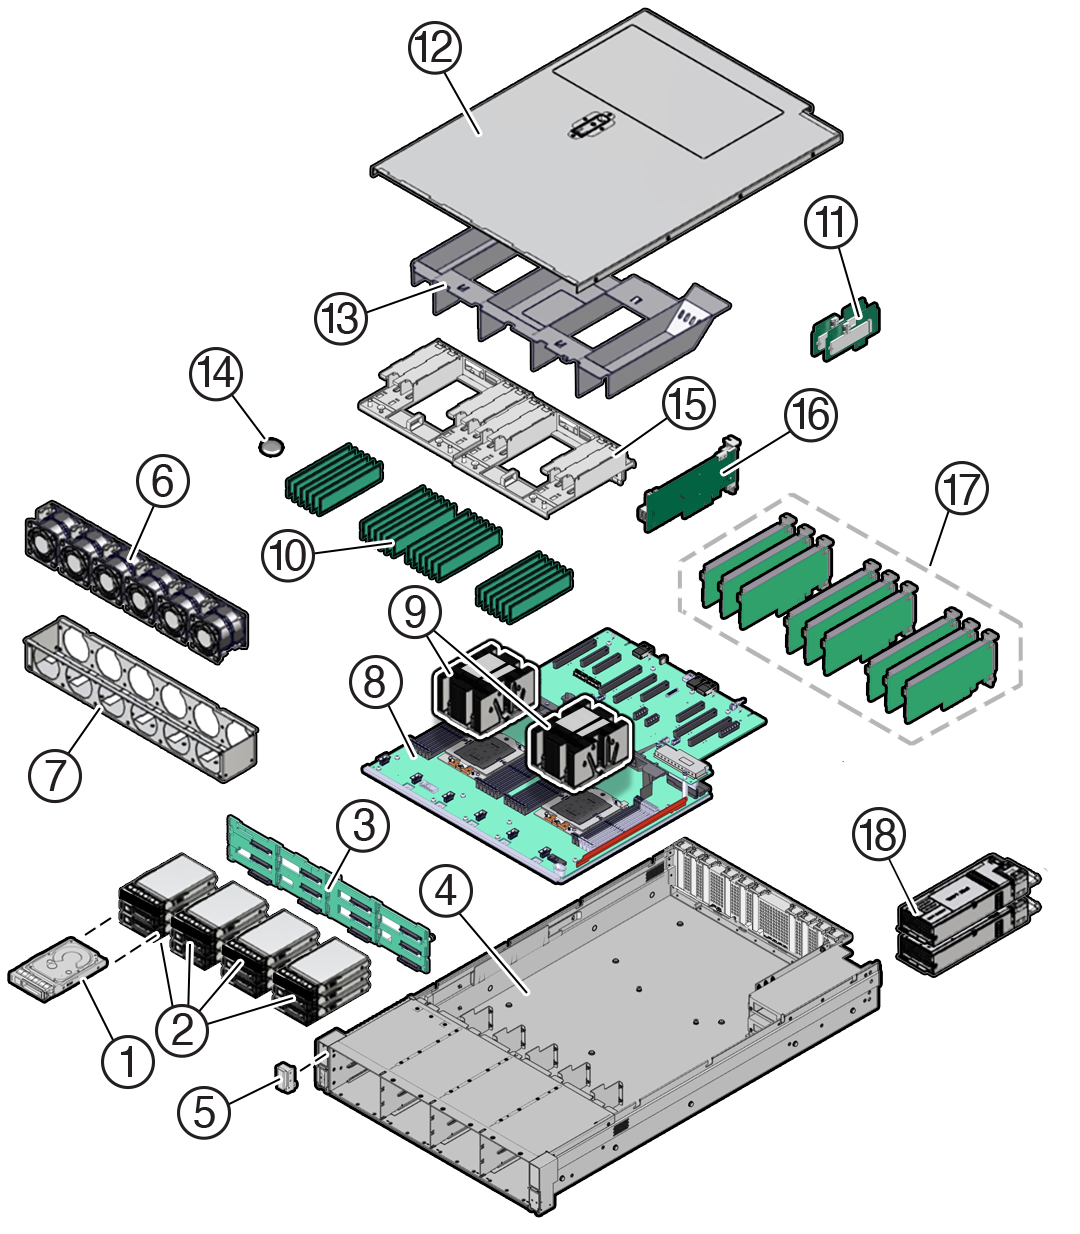 Figure showing exploded view of server with 12-Drive backplane system components.